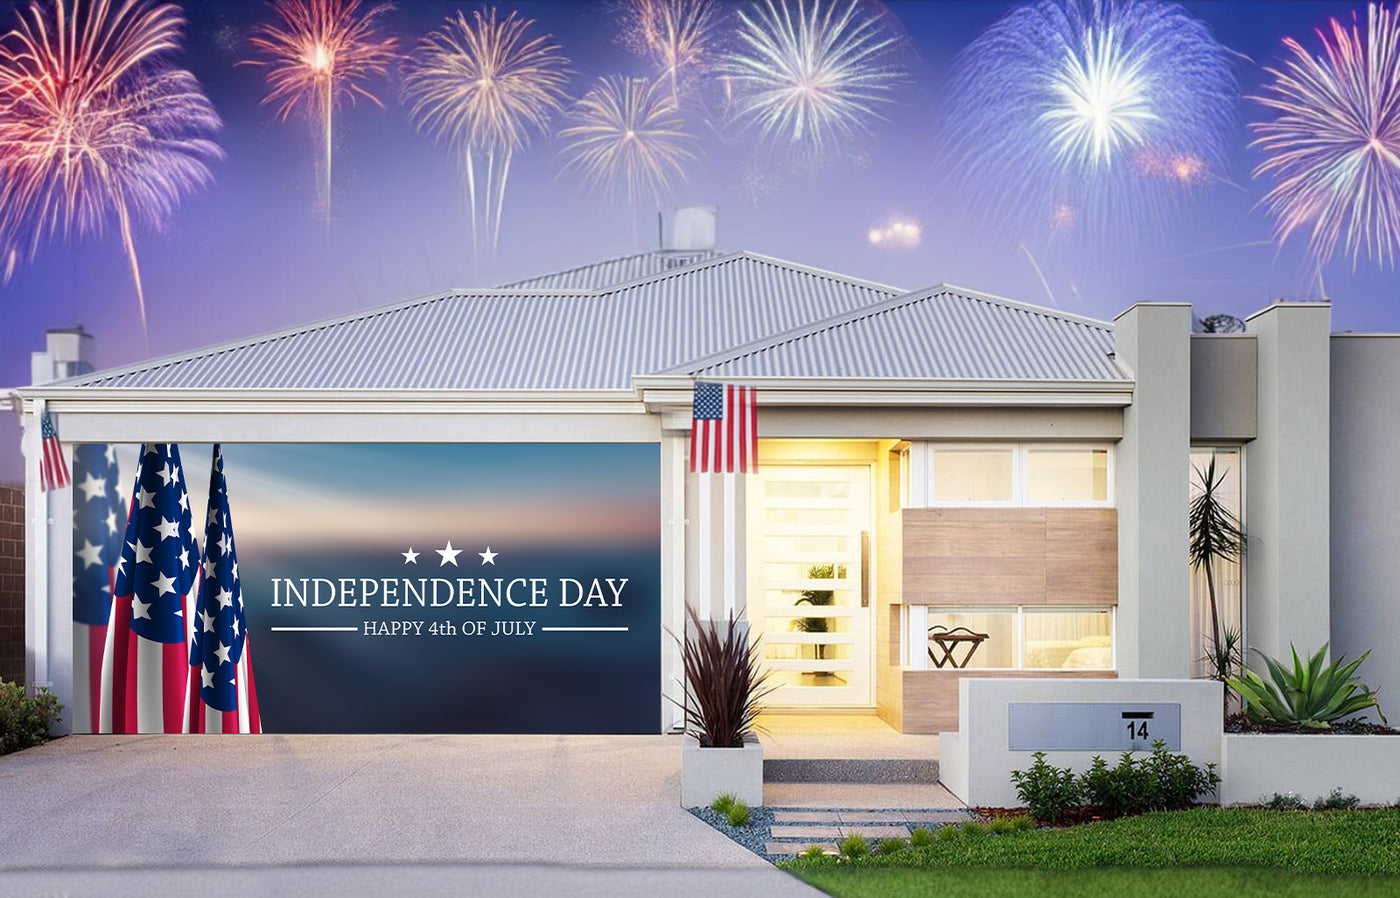 Independence Day USA Flag Happy 4th of July Garage Door Cover Banner